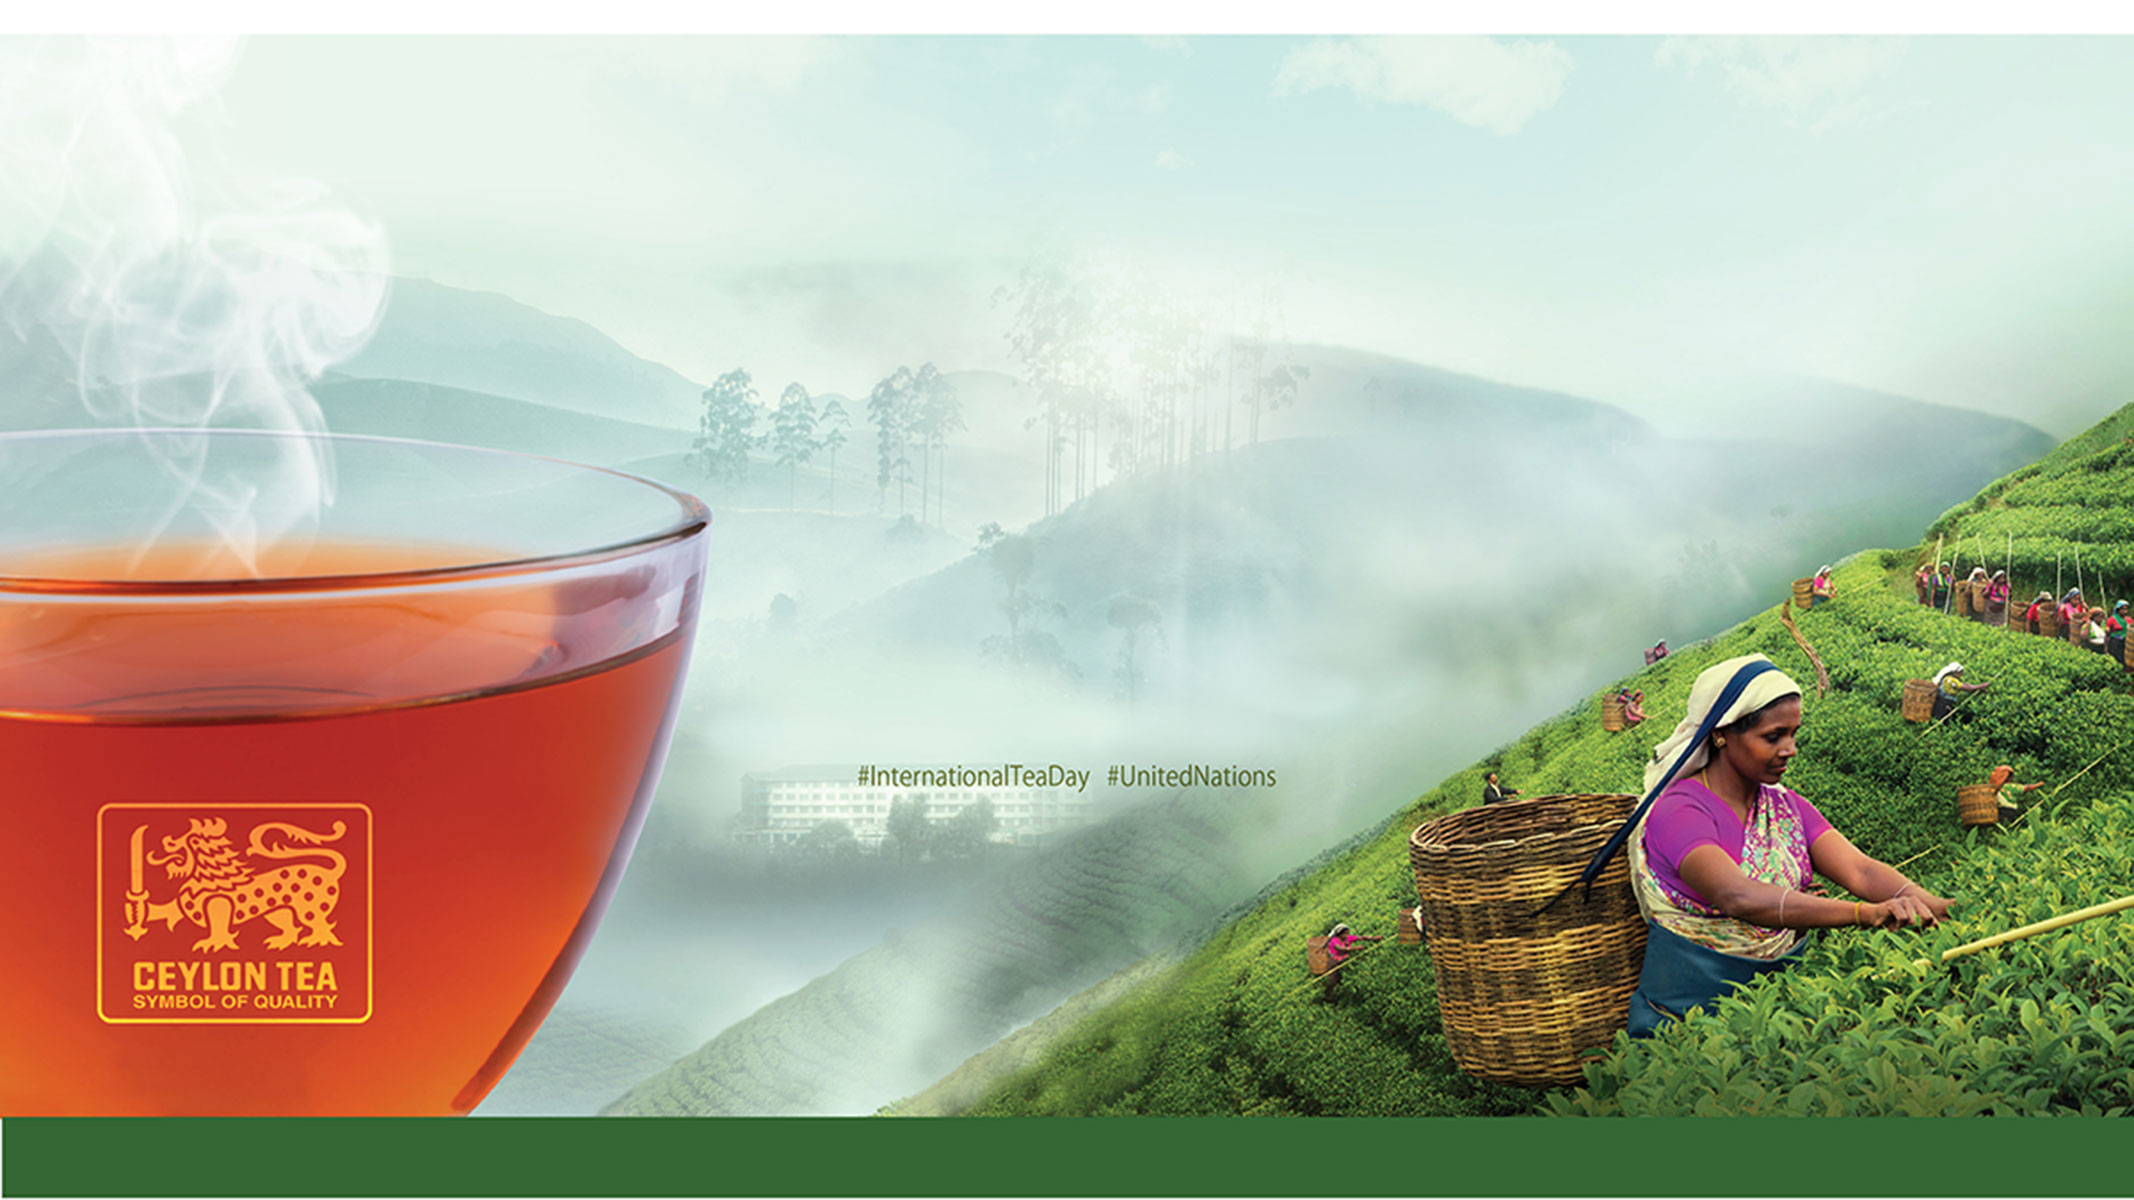 TRIBUTE TO THE GLOBAL TEA FRATERNITY